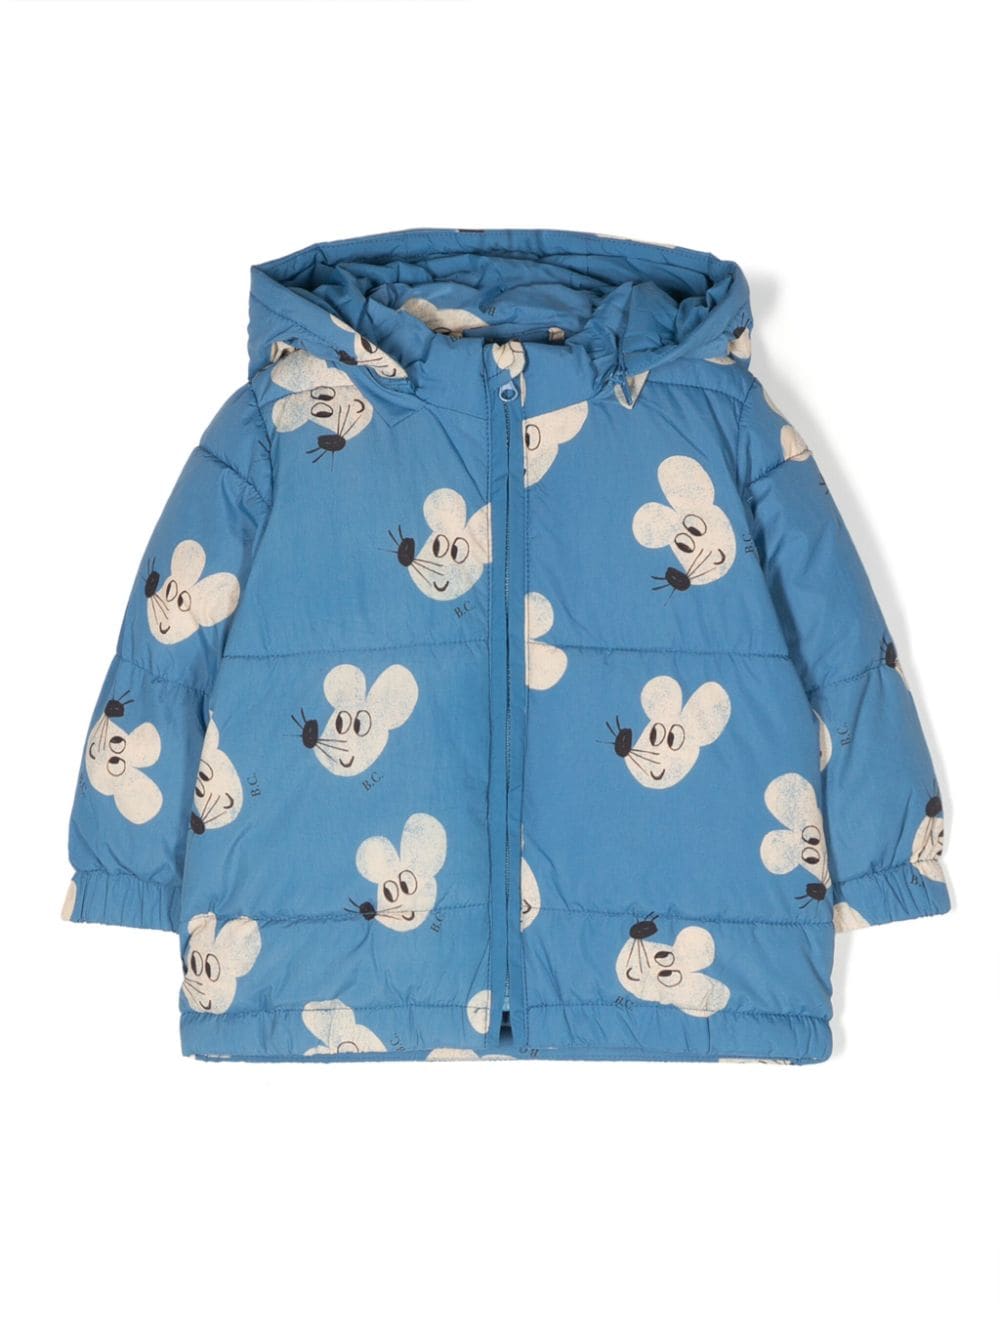 Bobo Choses Mouse All Over Hooded Anorak